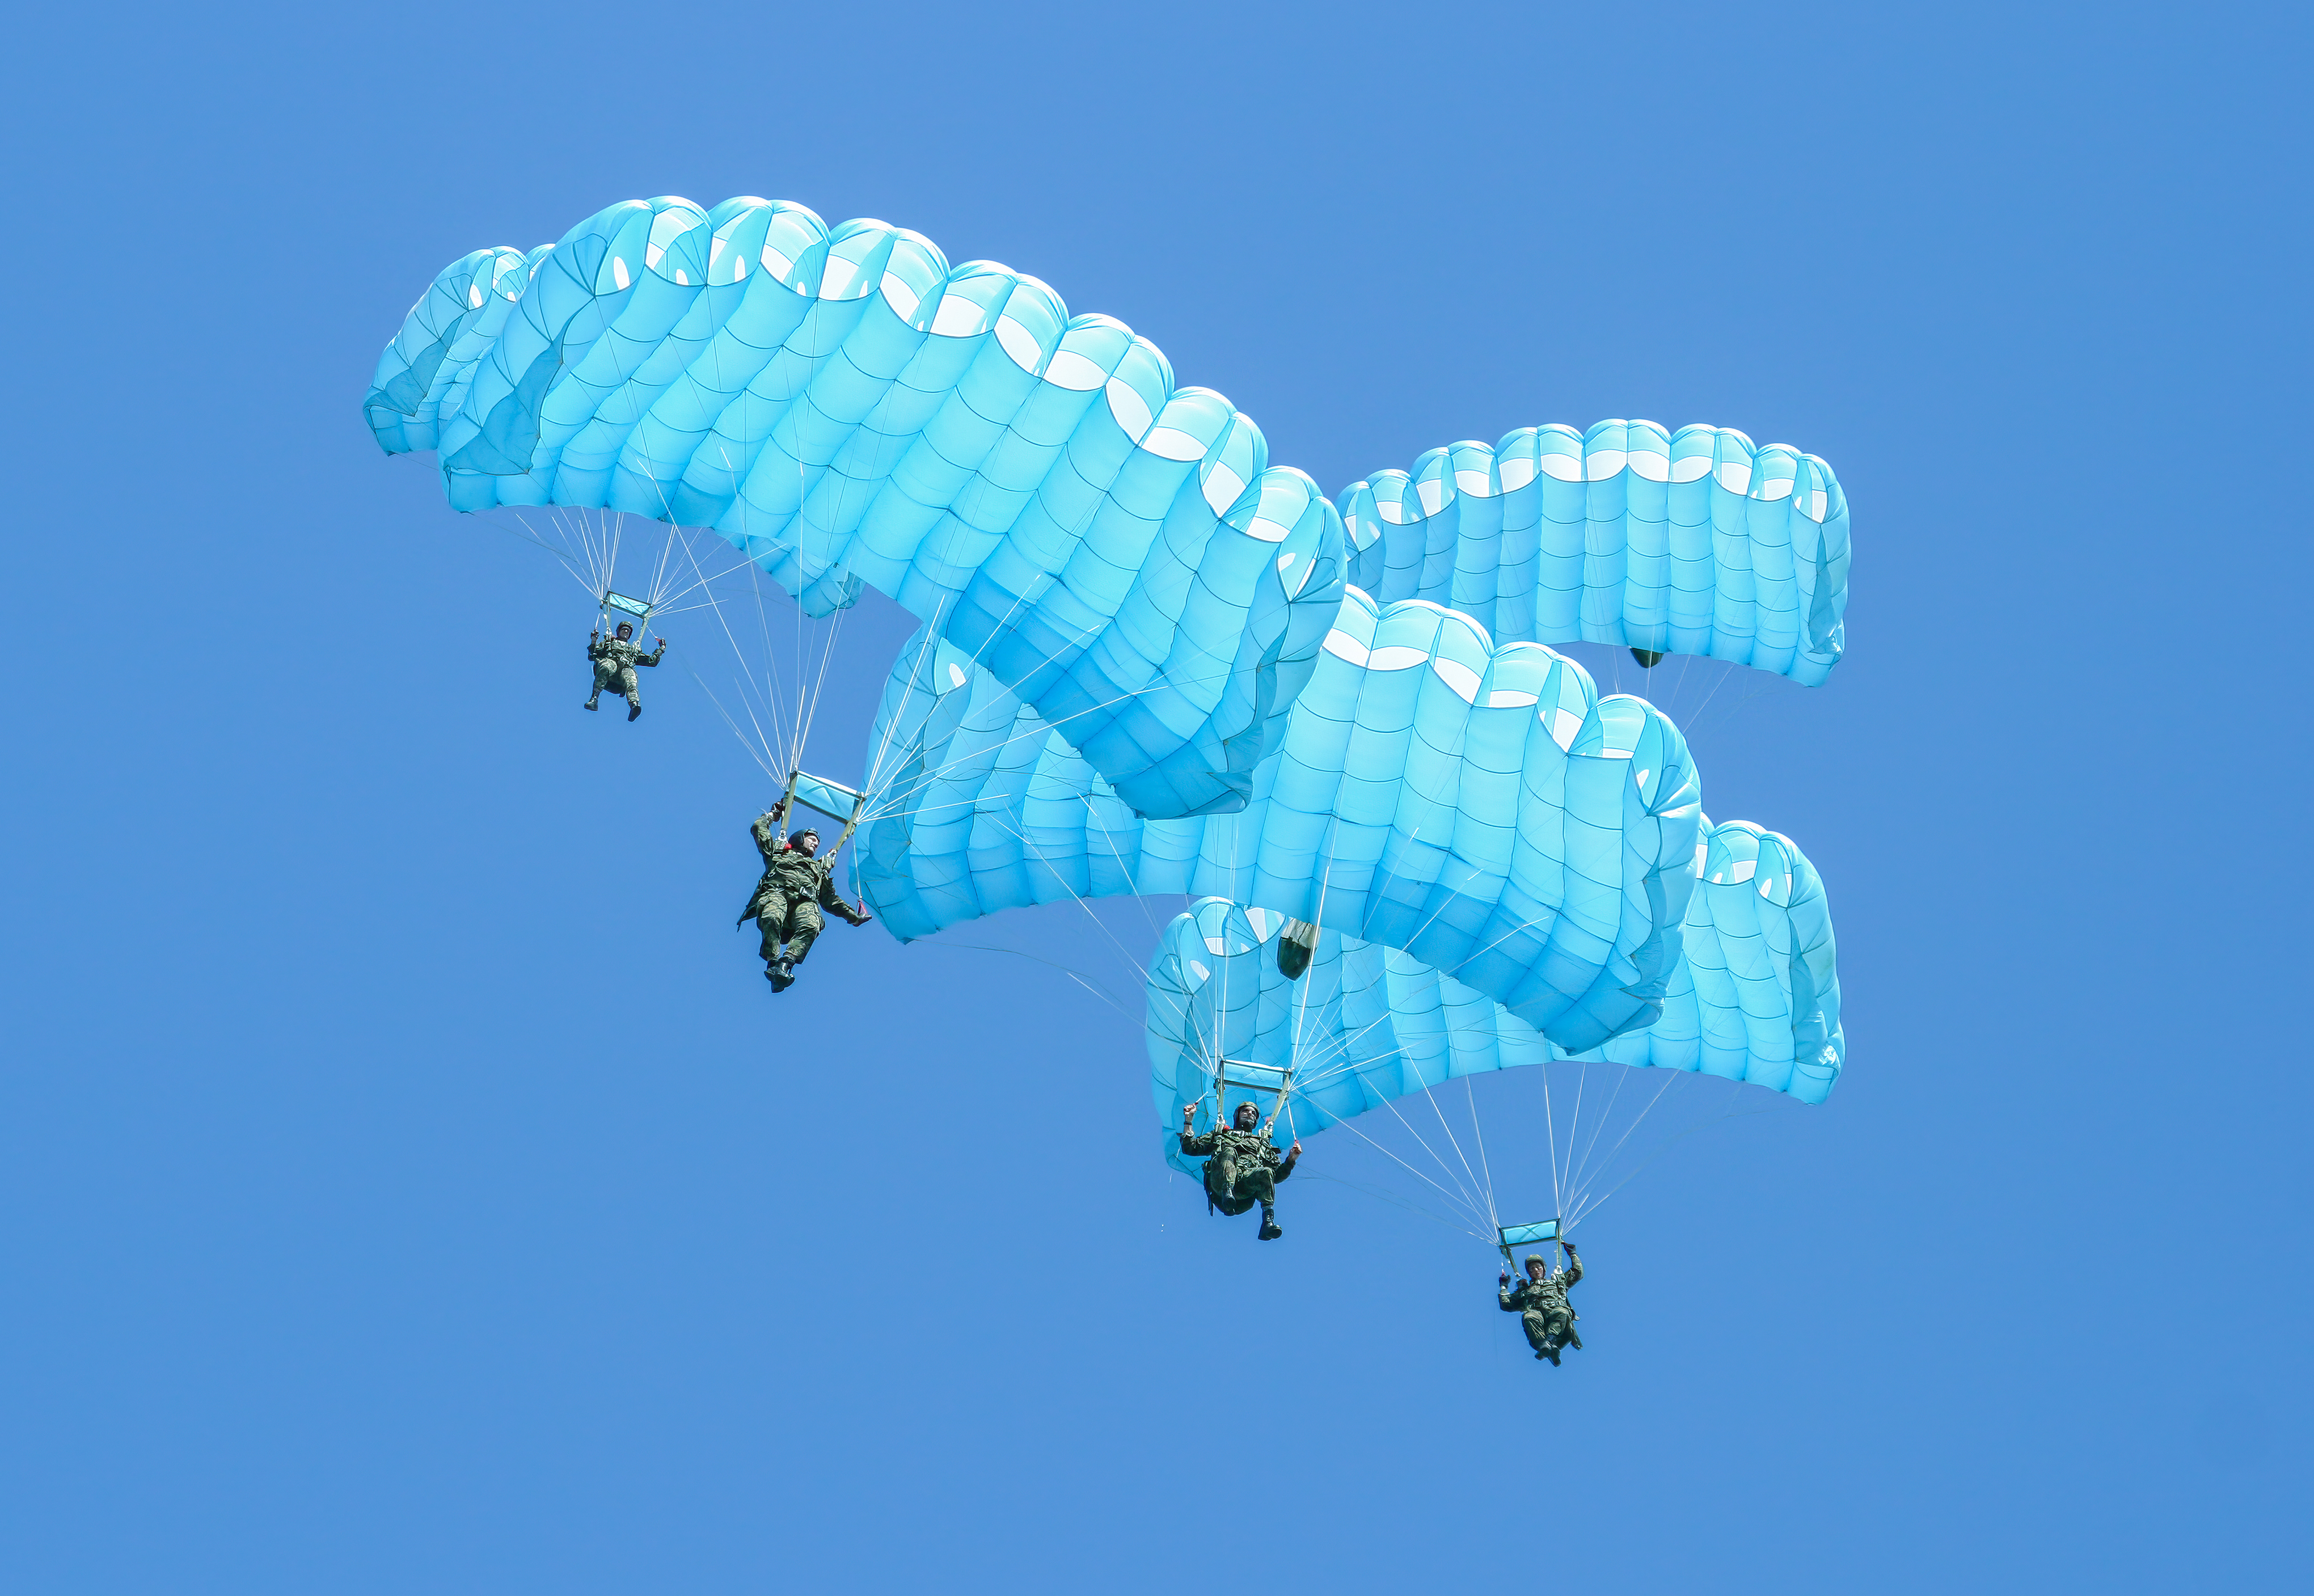 Parachutist jumping out of an airplane